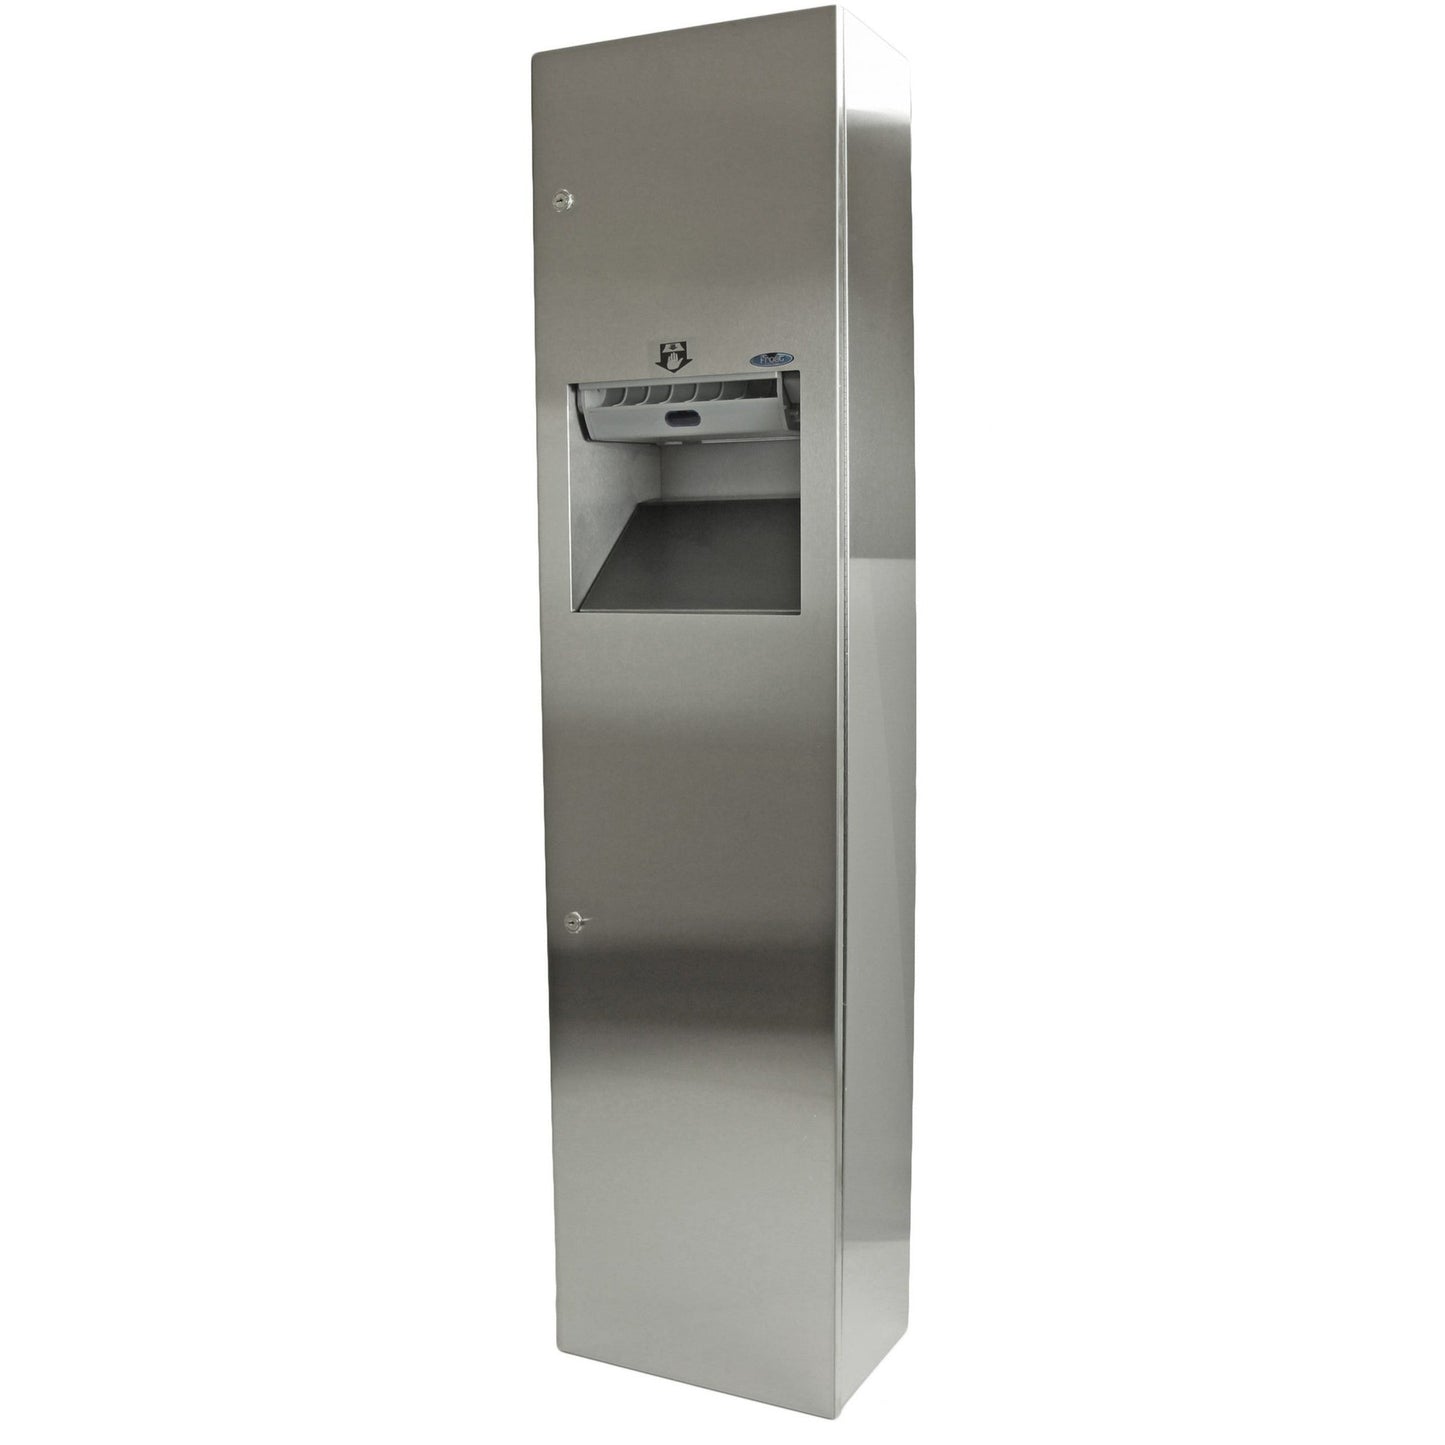 Frost 400-70B Semi Recessed Auto Roll Stainless Steel Paper Dispenser and Disposal